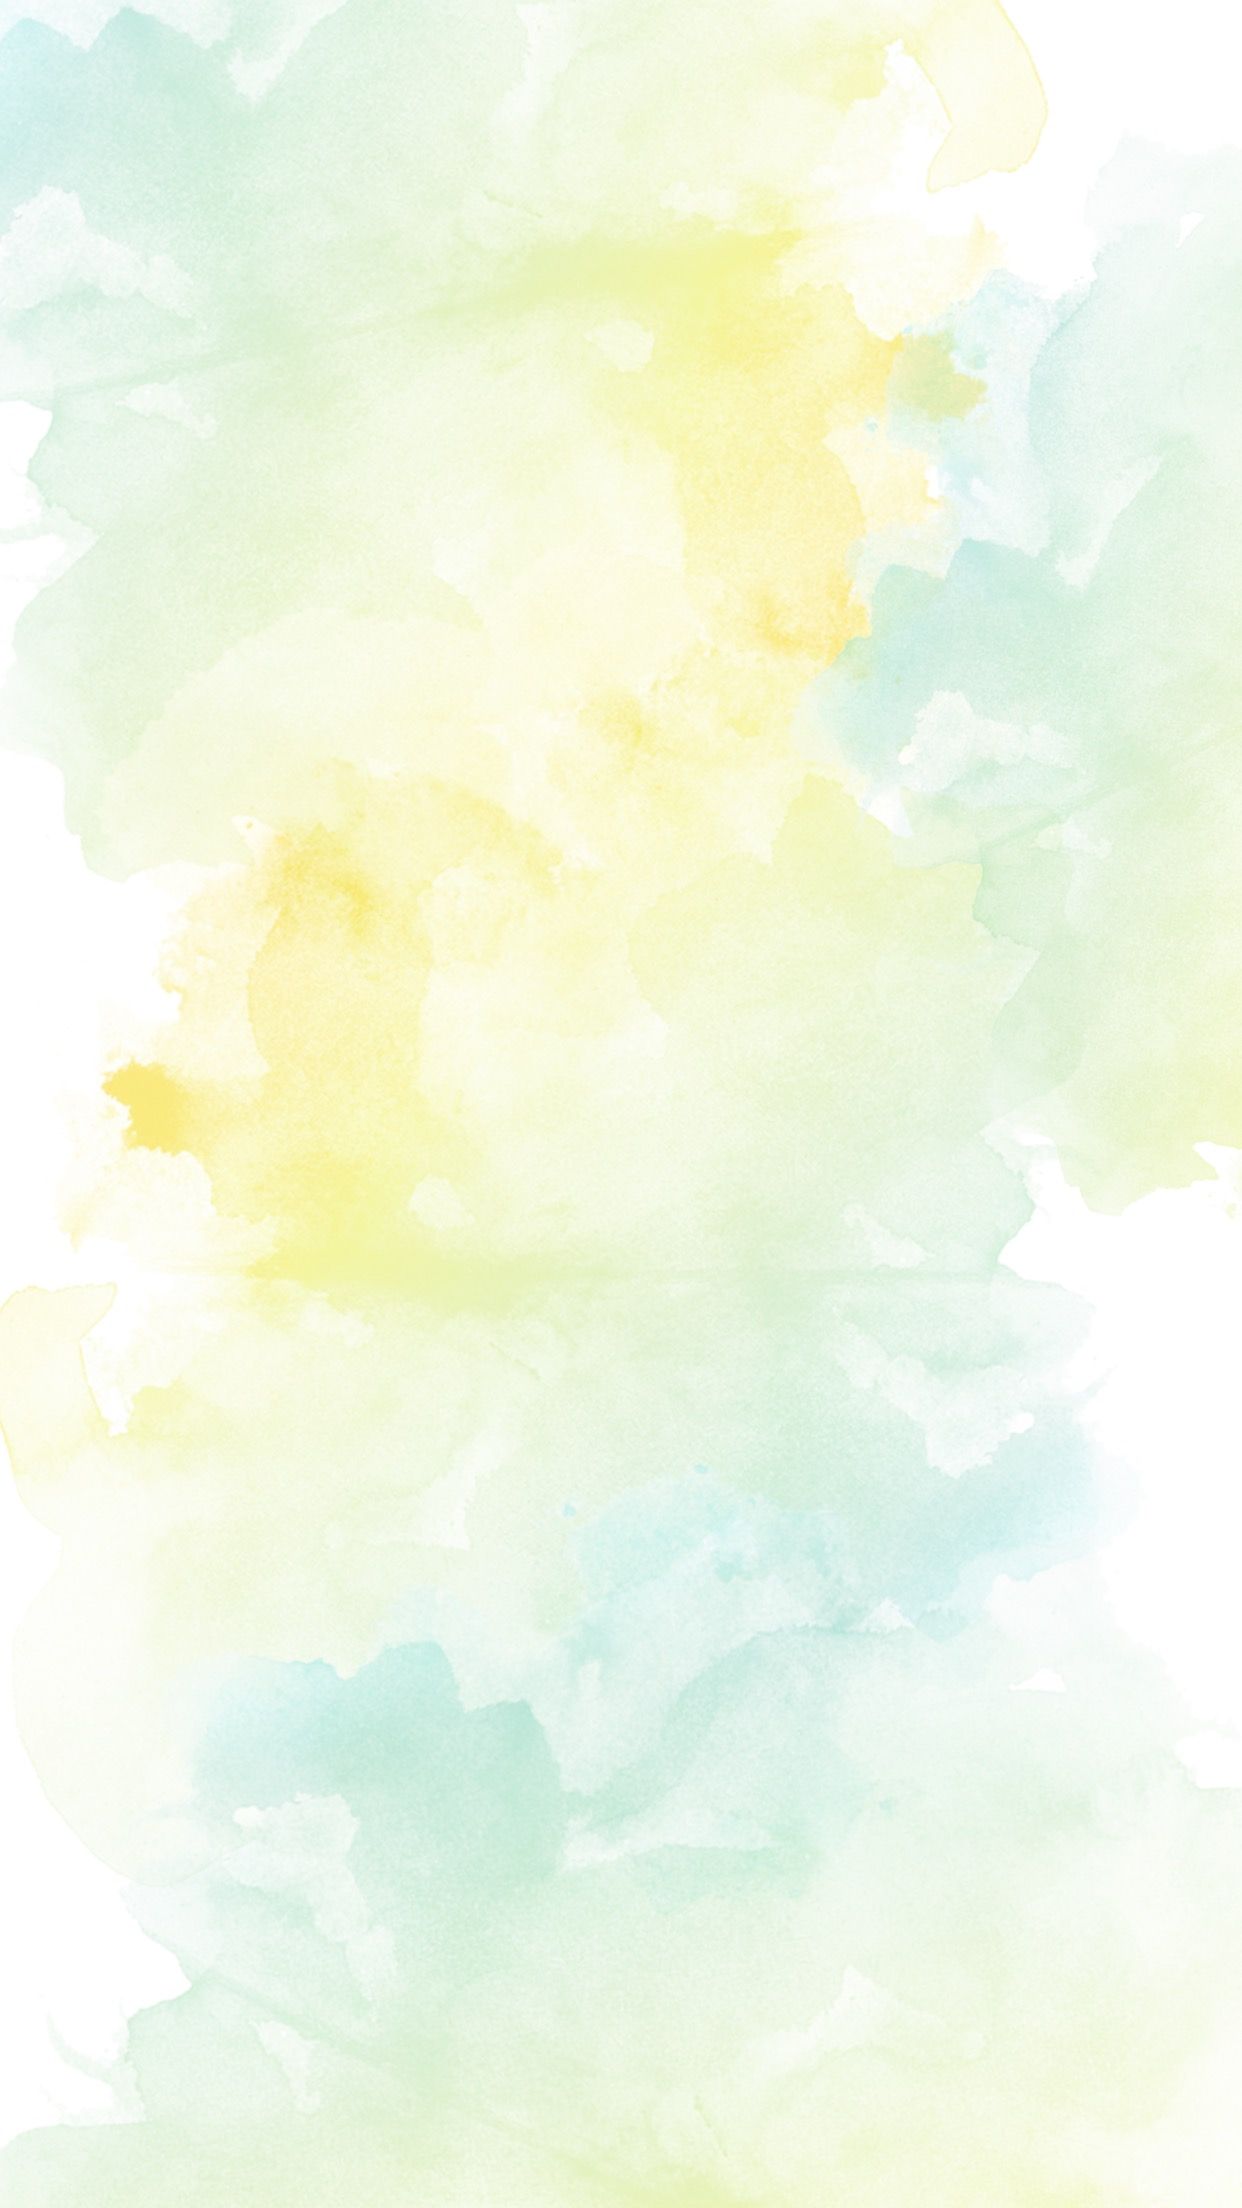 Watercolour Aesthetic Wallpaper Free Watercolour Aesthetic Background